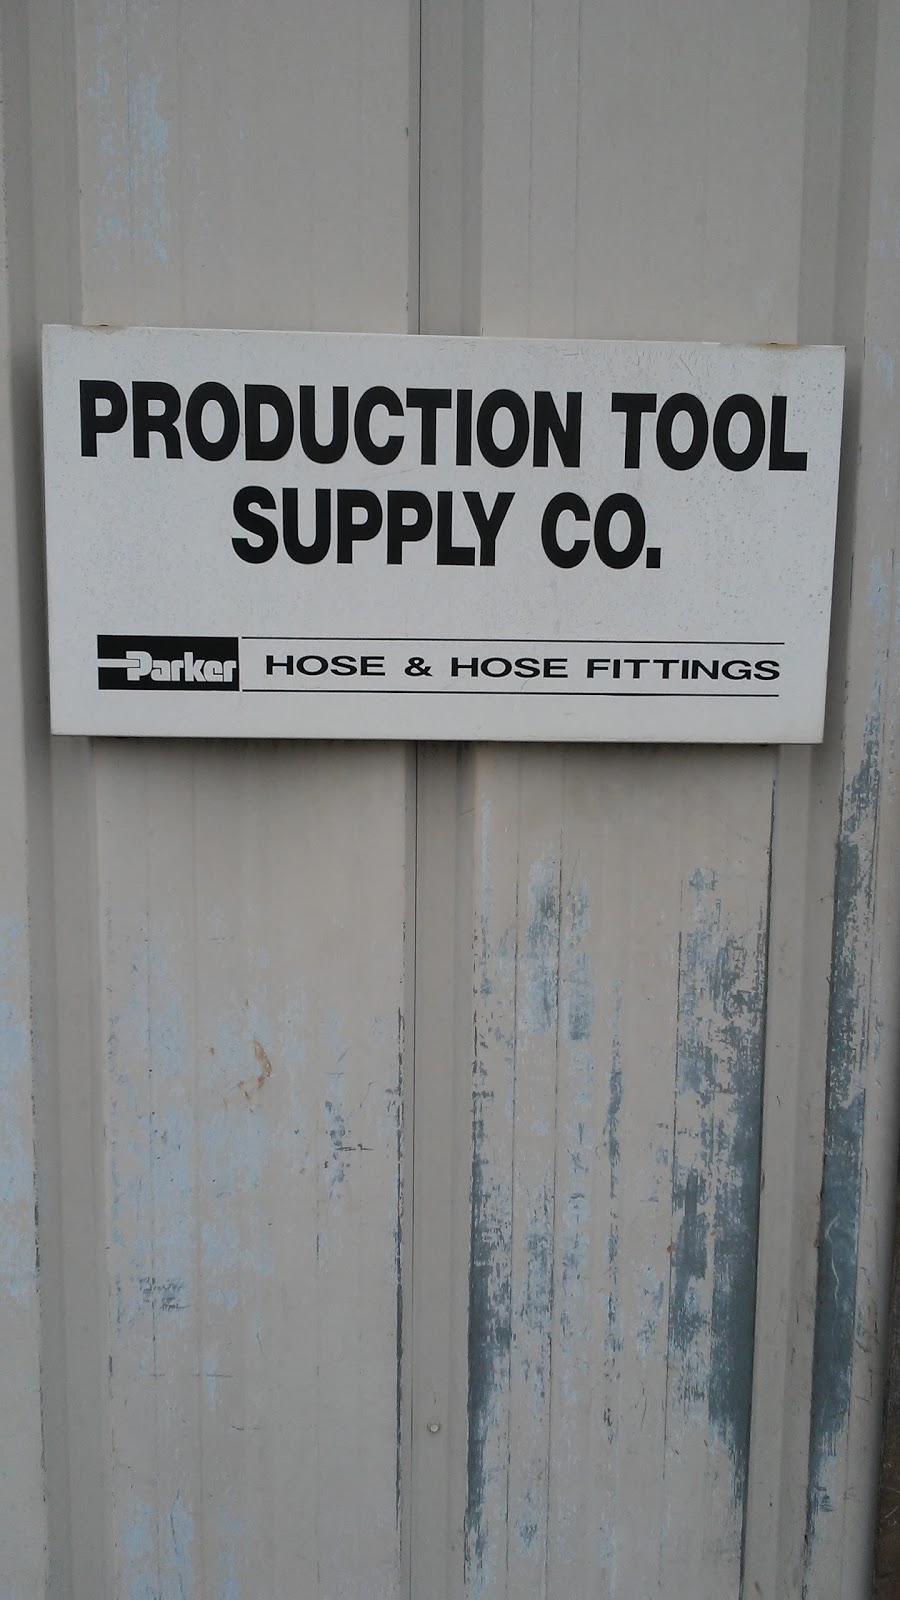 Production Tool Supply Co. Inc | Photo 4 of 4 | Address: 6136 Prospect St, Archdale, NC 27263, USA | Phone: (336) 885-4219